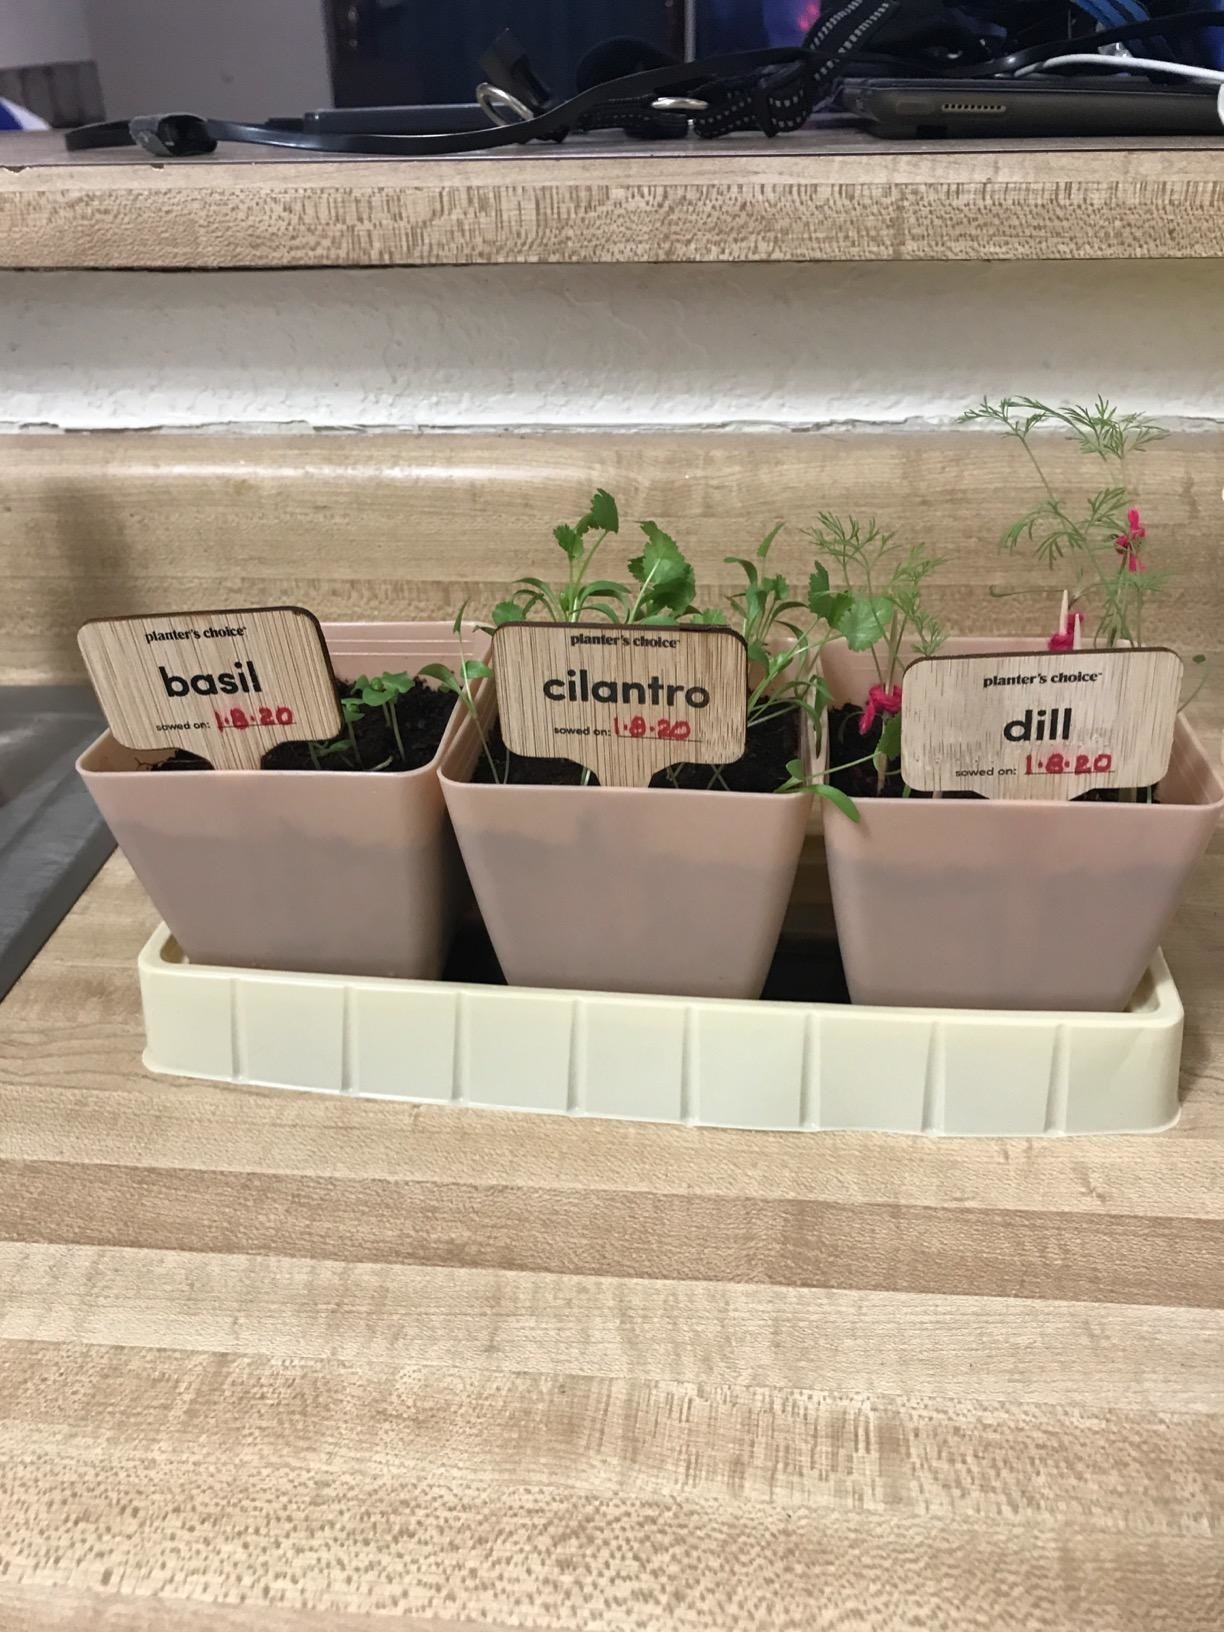 Reviewer photo of their growing basil, cilantro, and dill plants